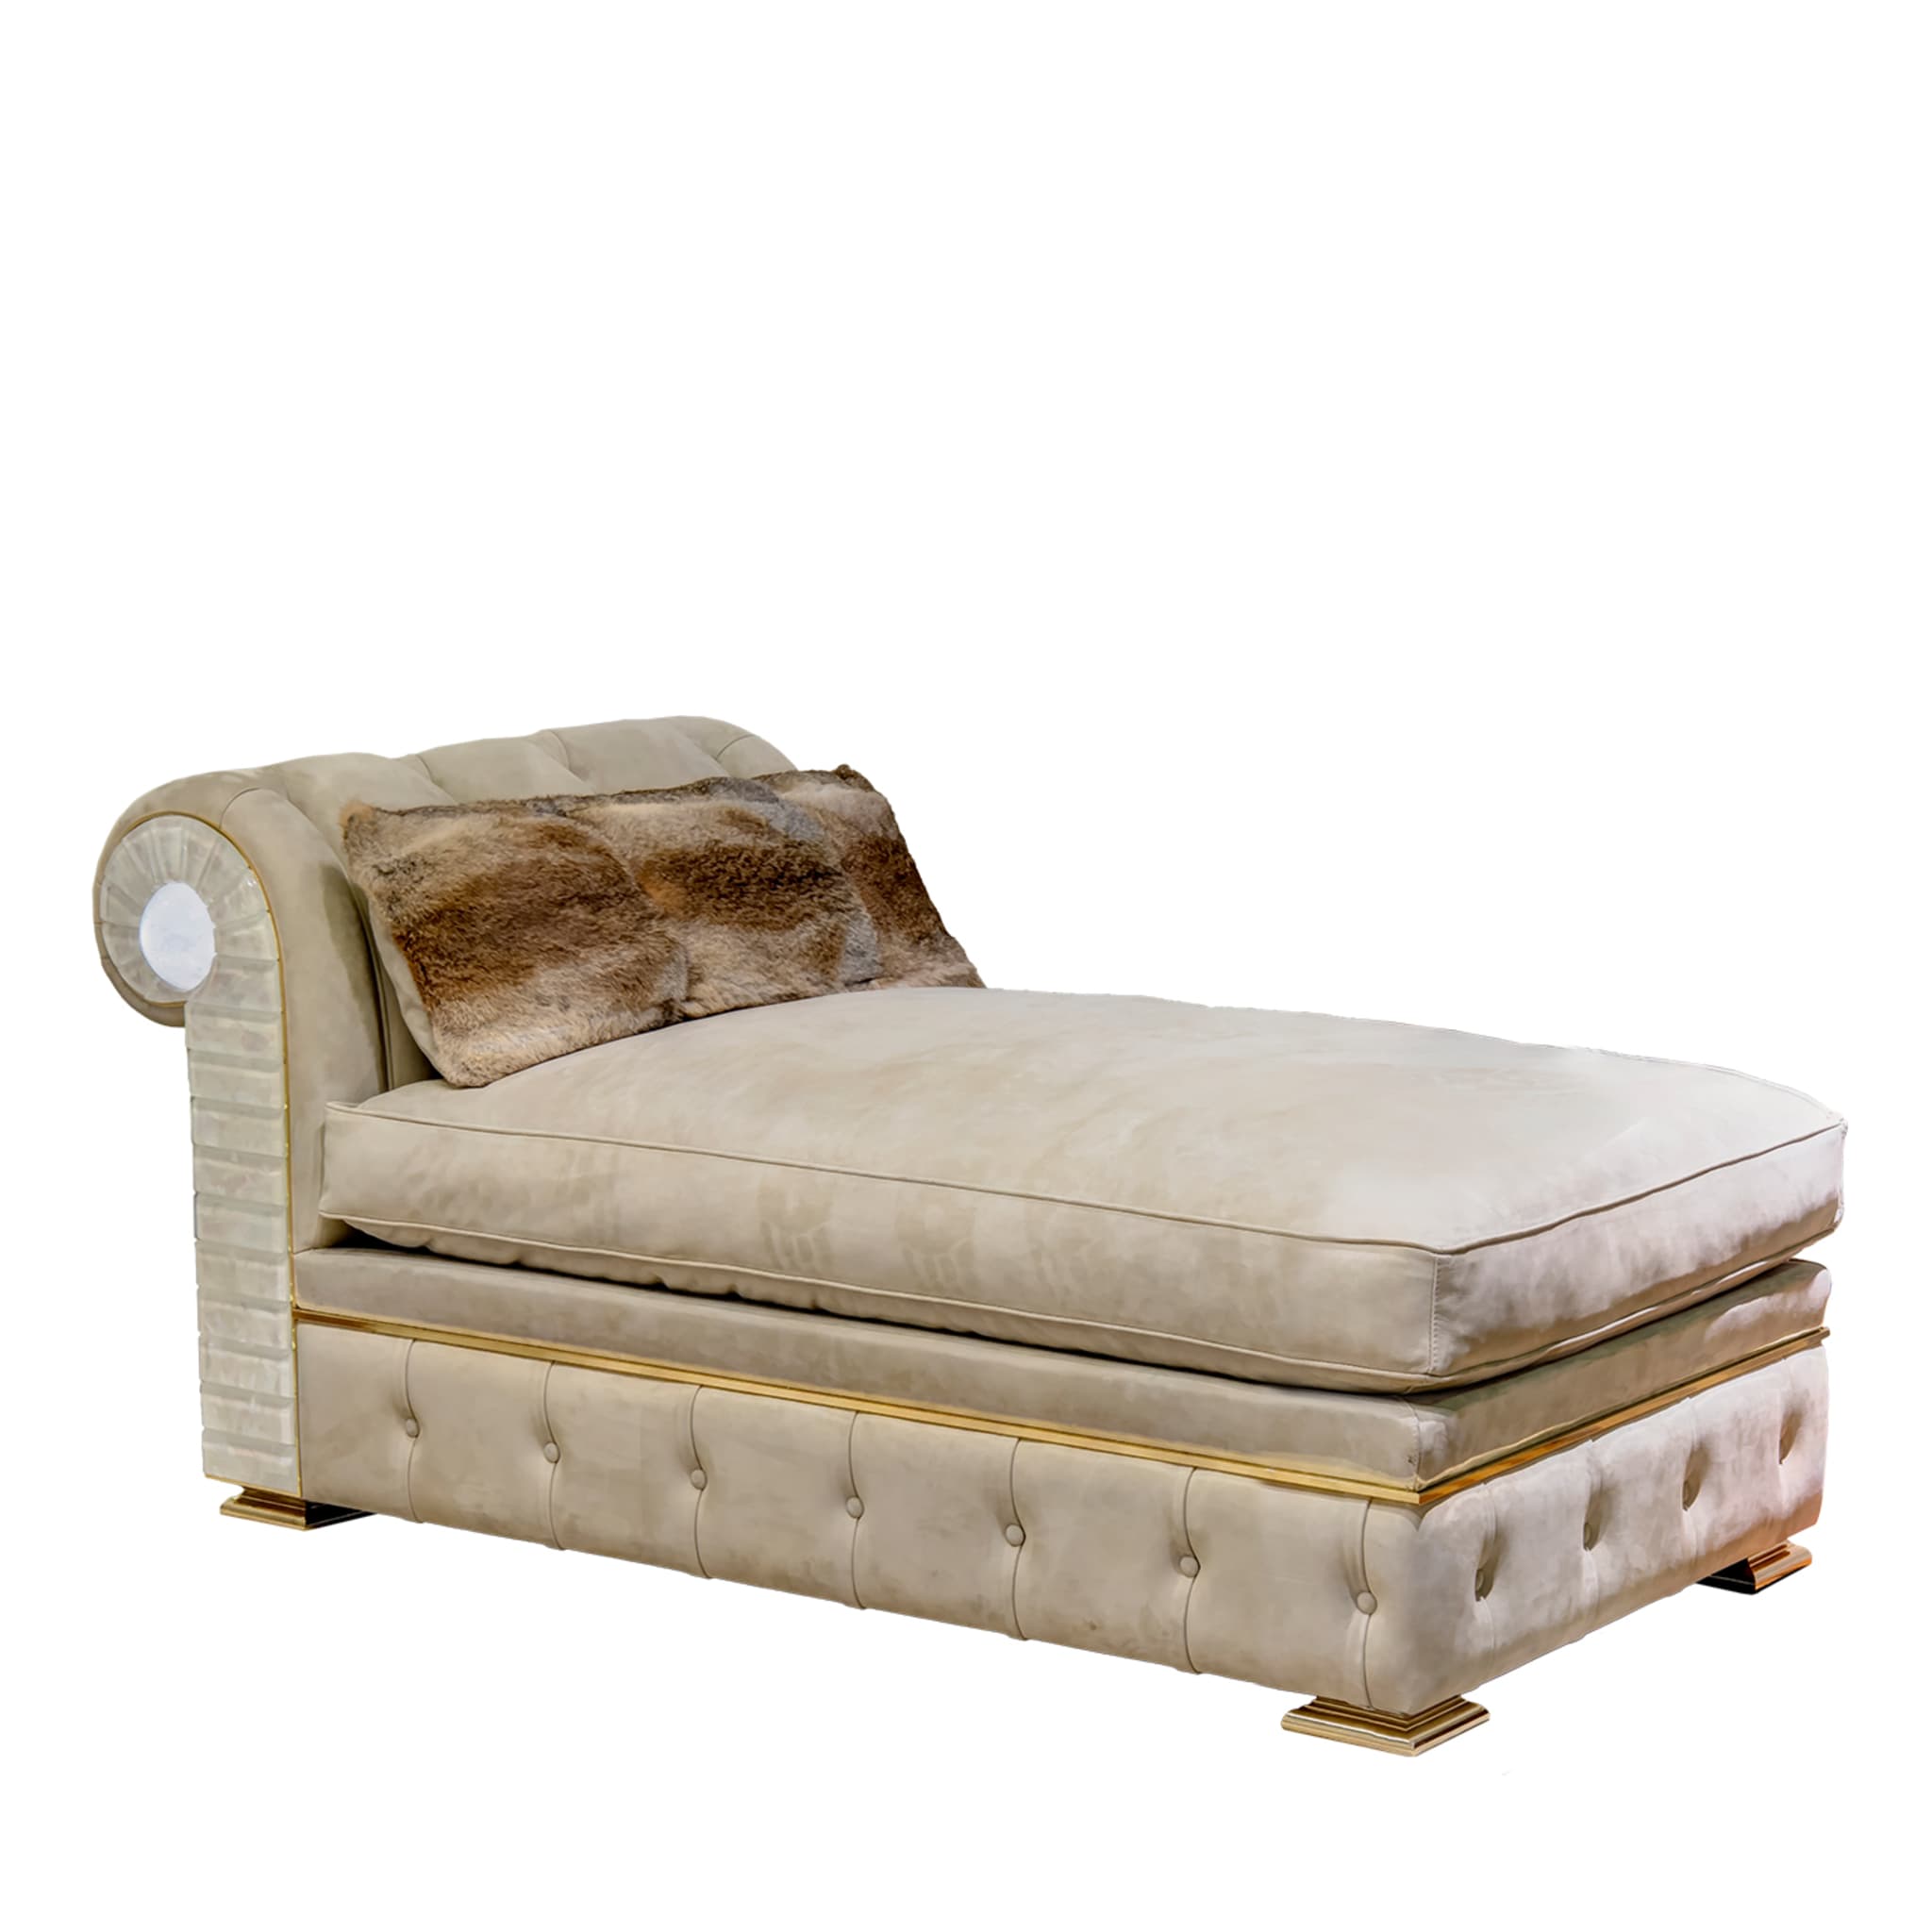 Contemporary Classic Chaise Longue #1 - Main view